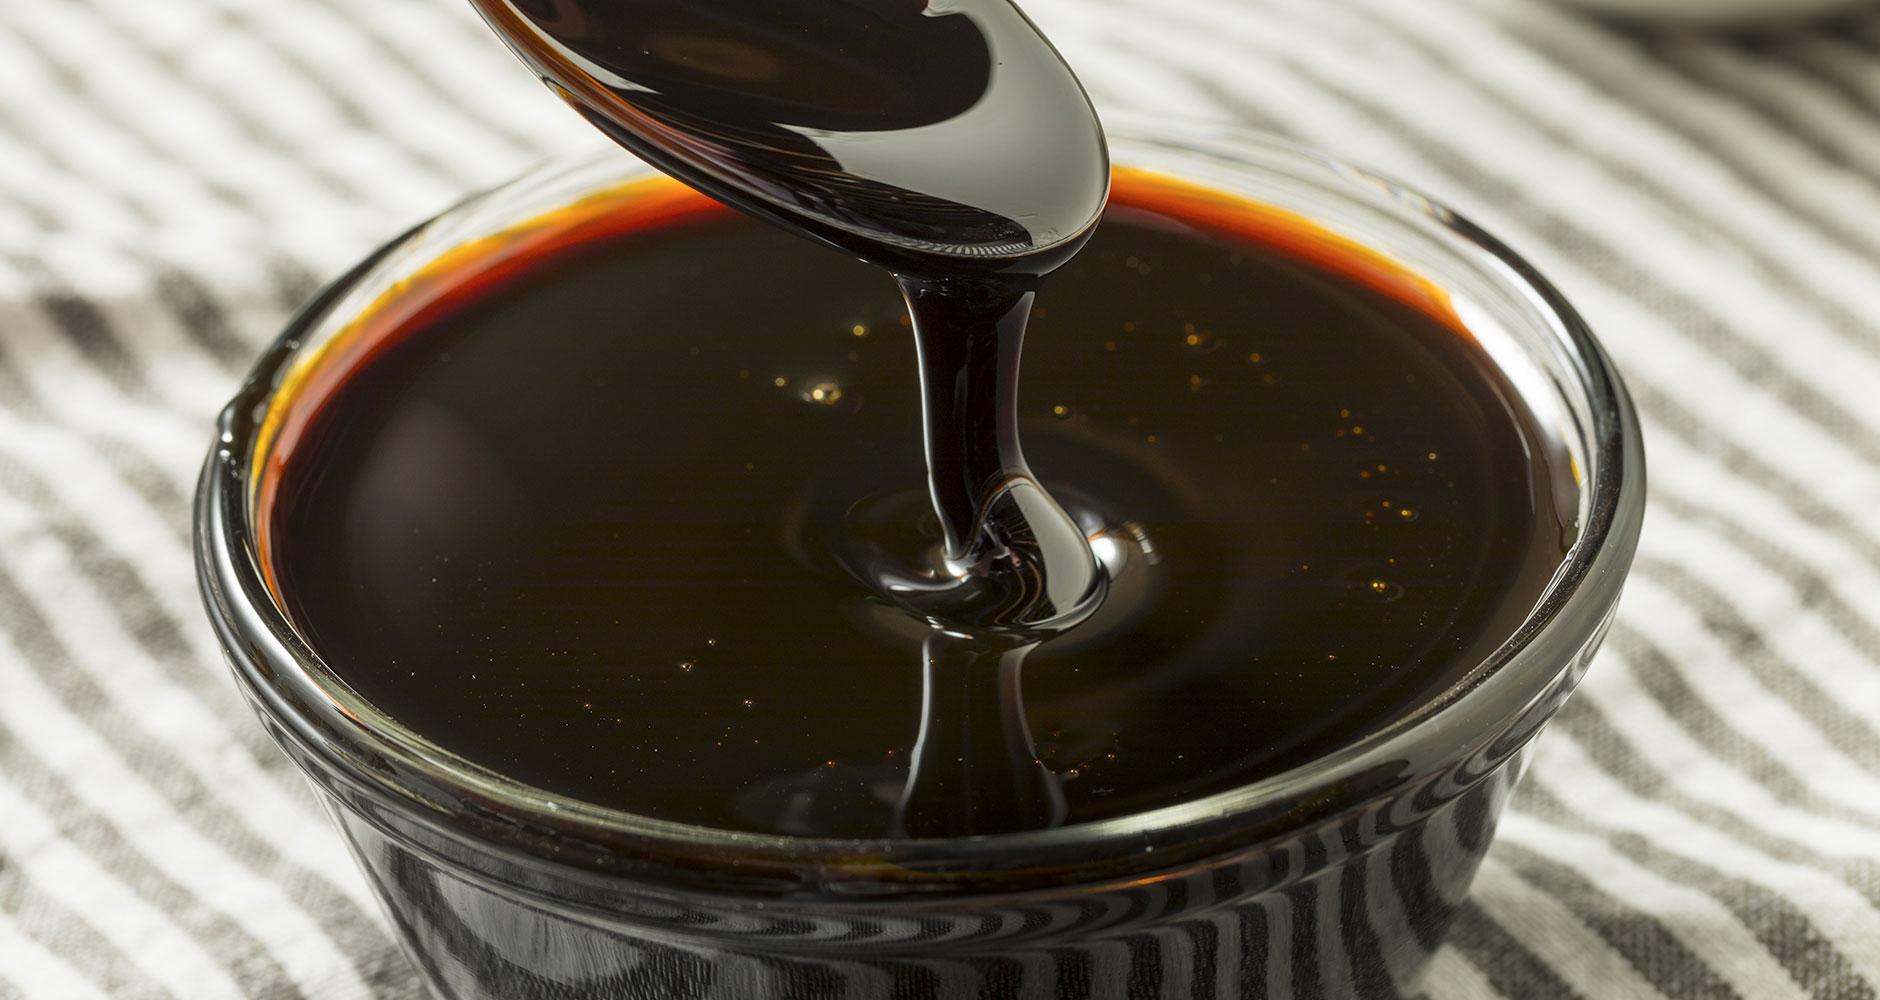 Blackstrap Molasses in a glass container getting scooped out by a silver spoon on a striped tablecloth